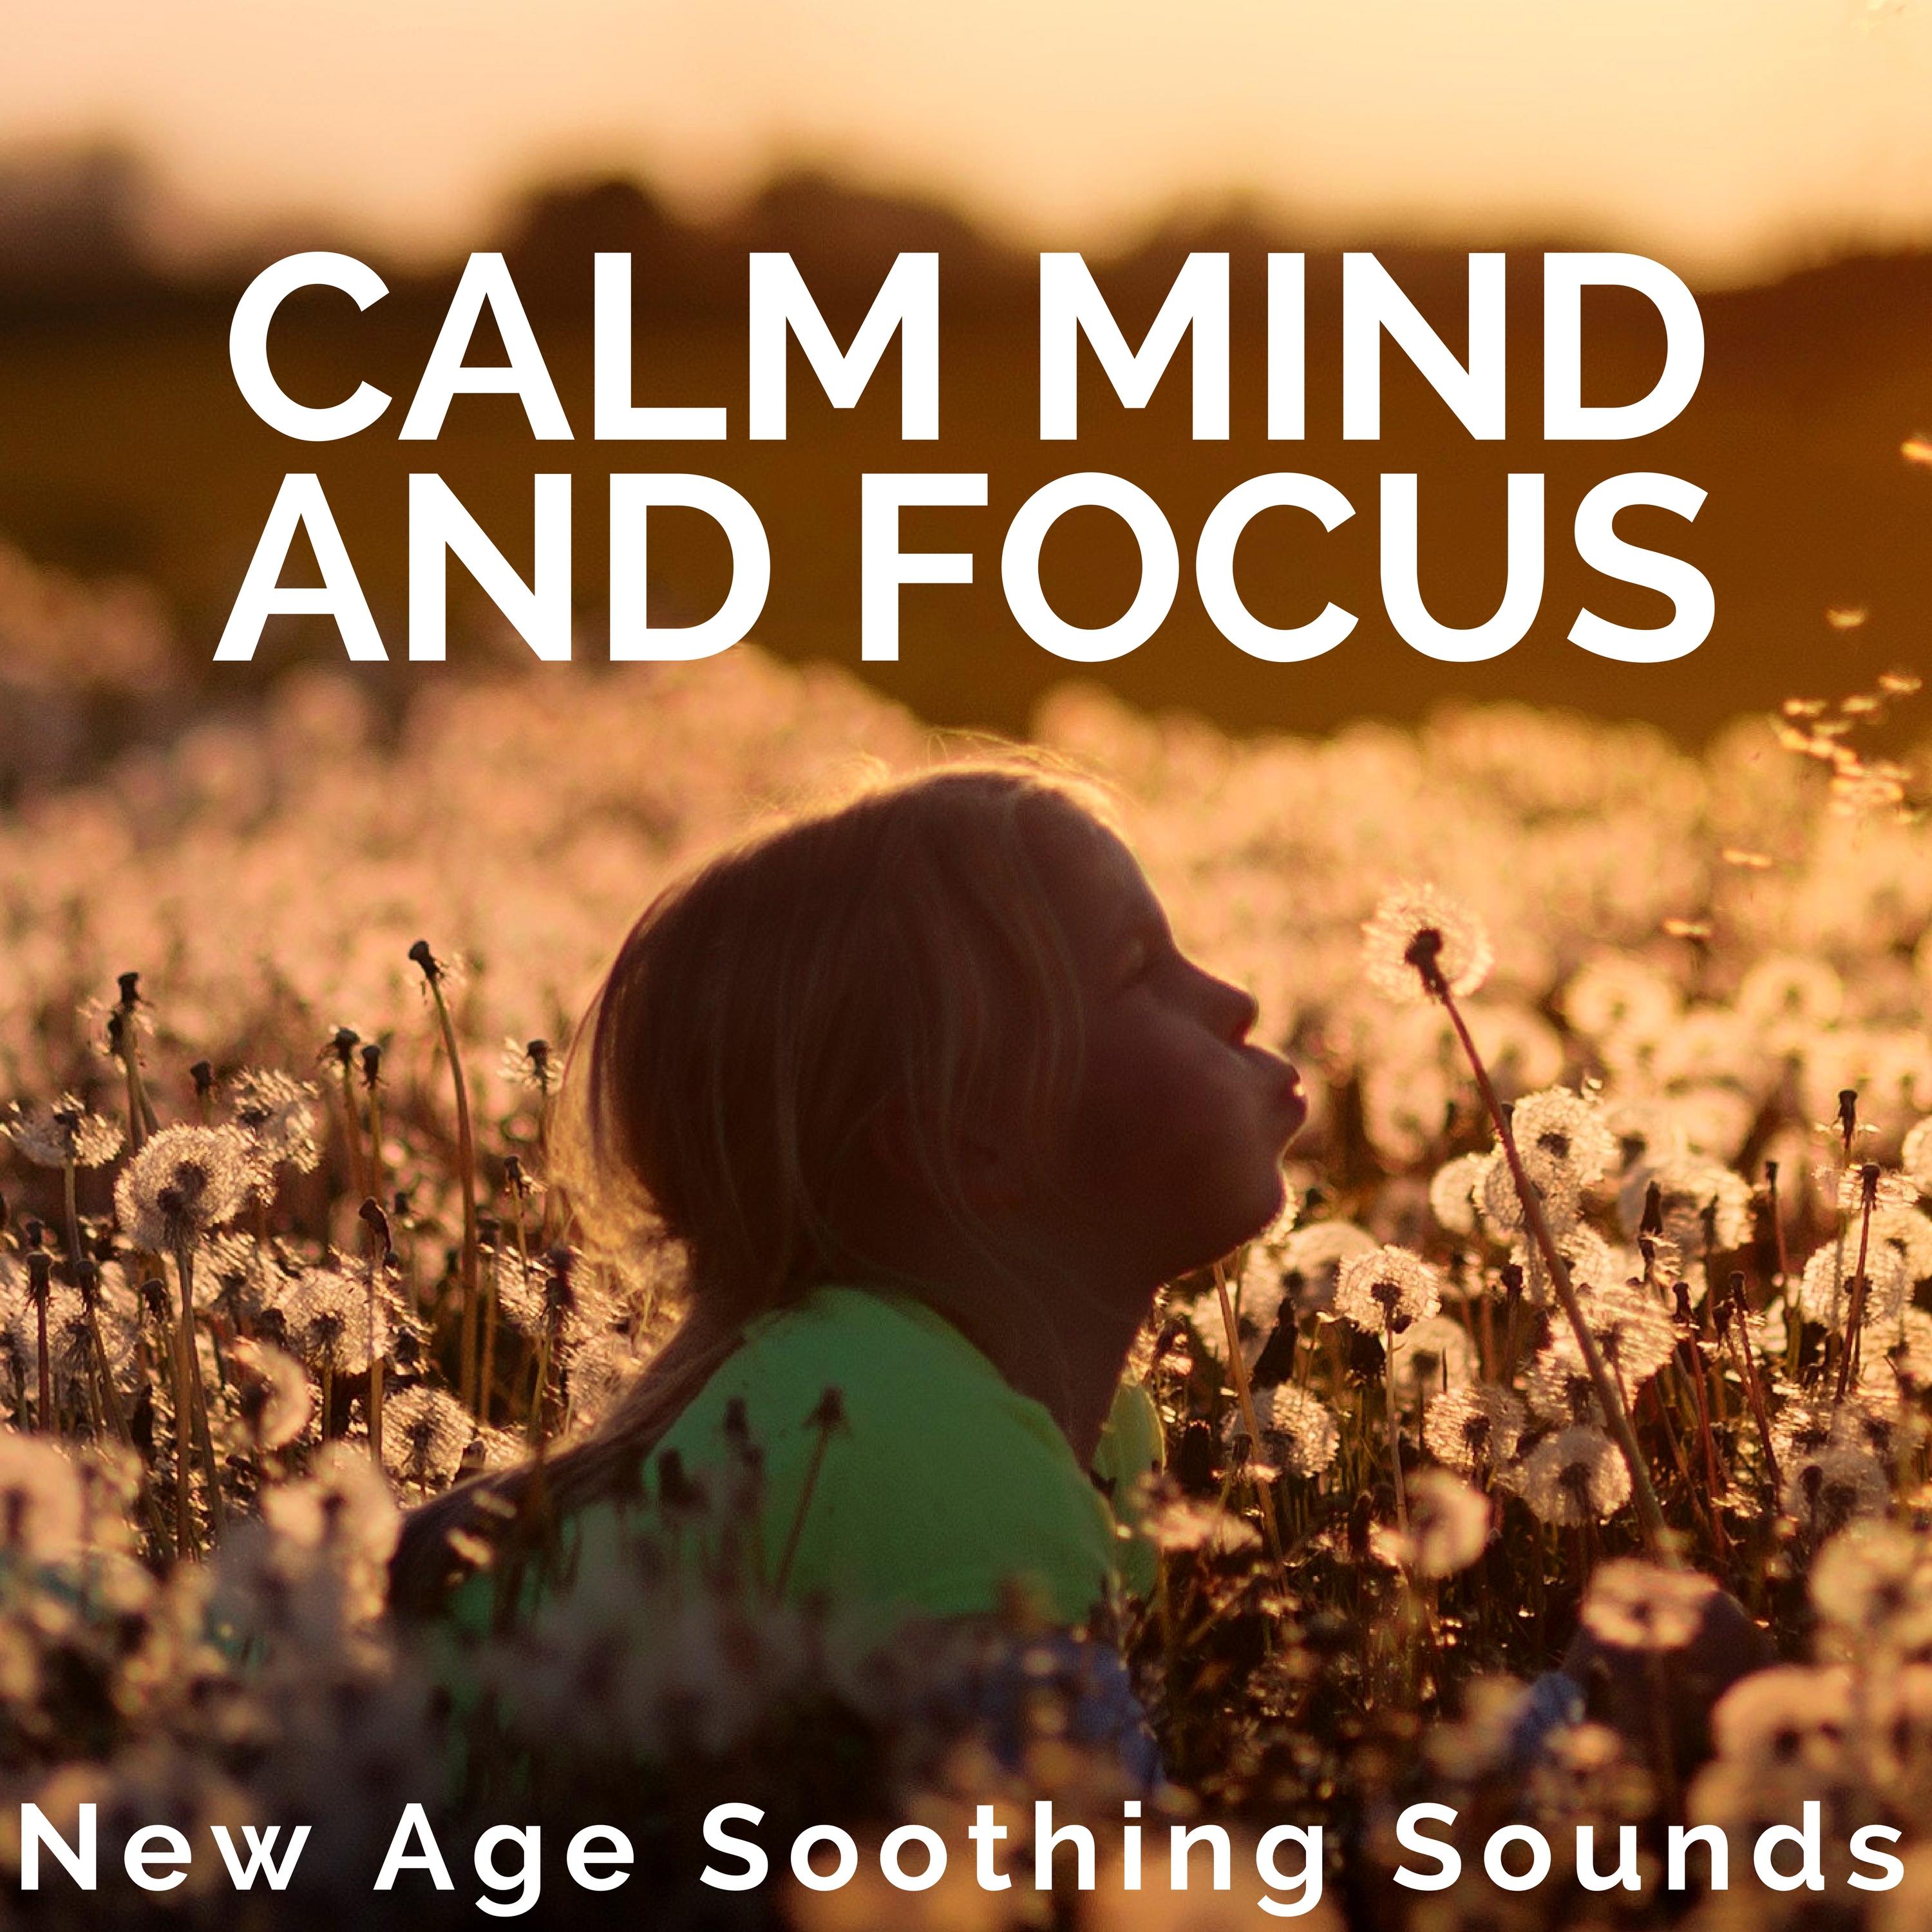 New Age Soothing Sounds